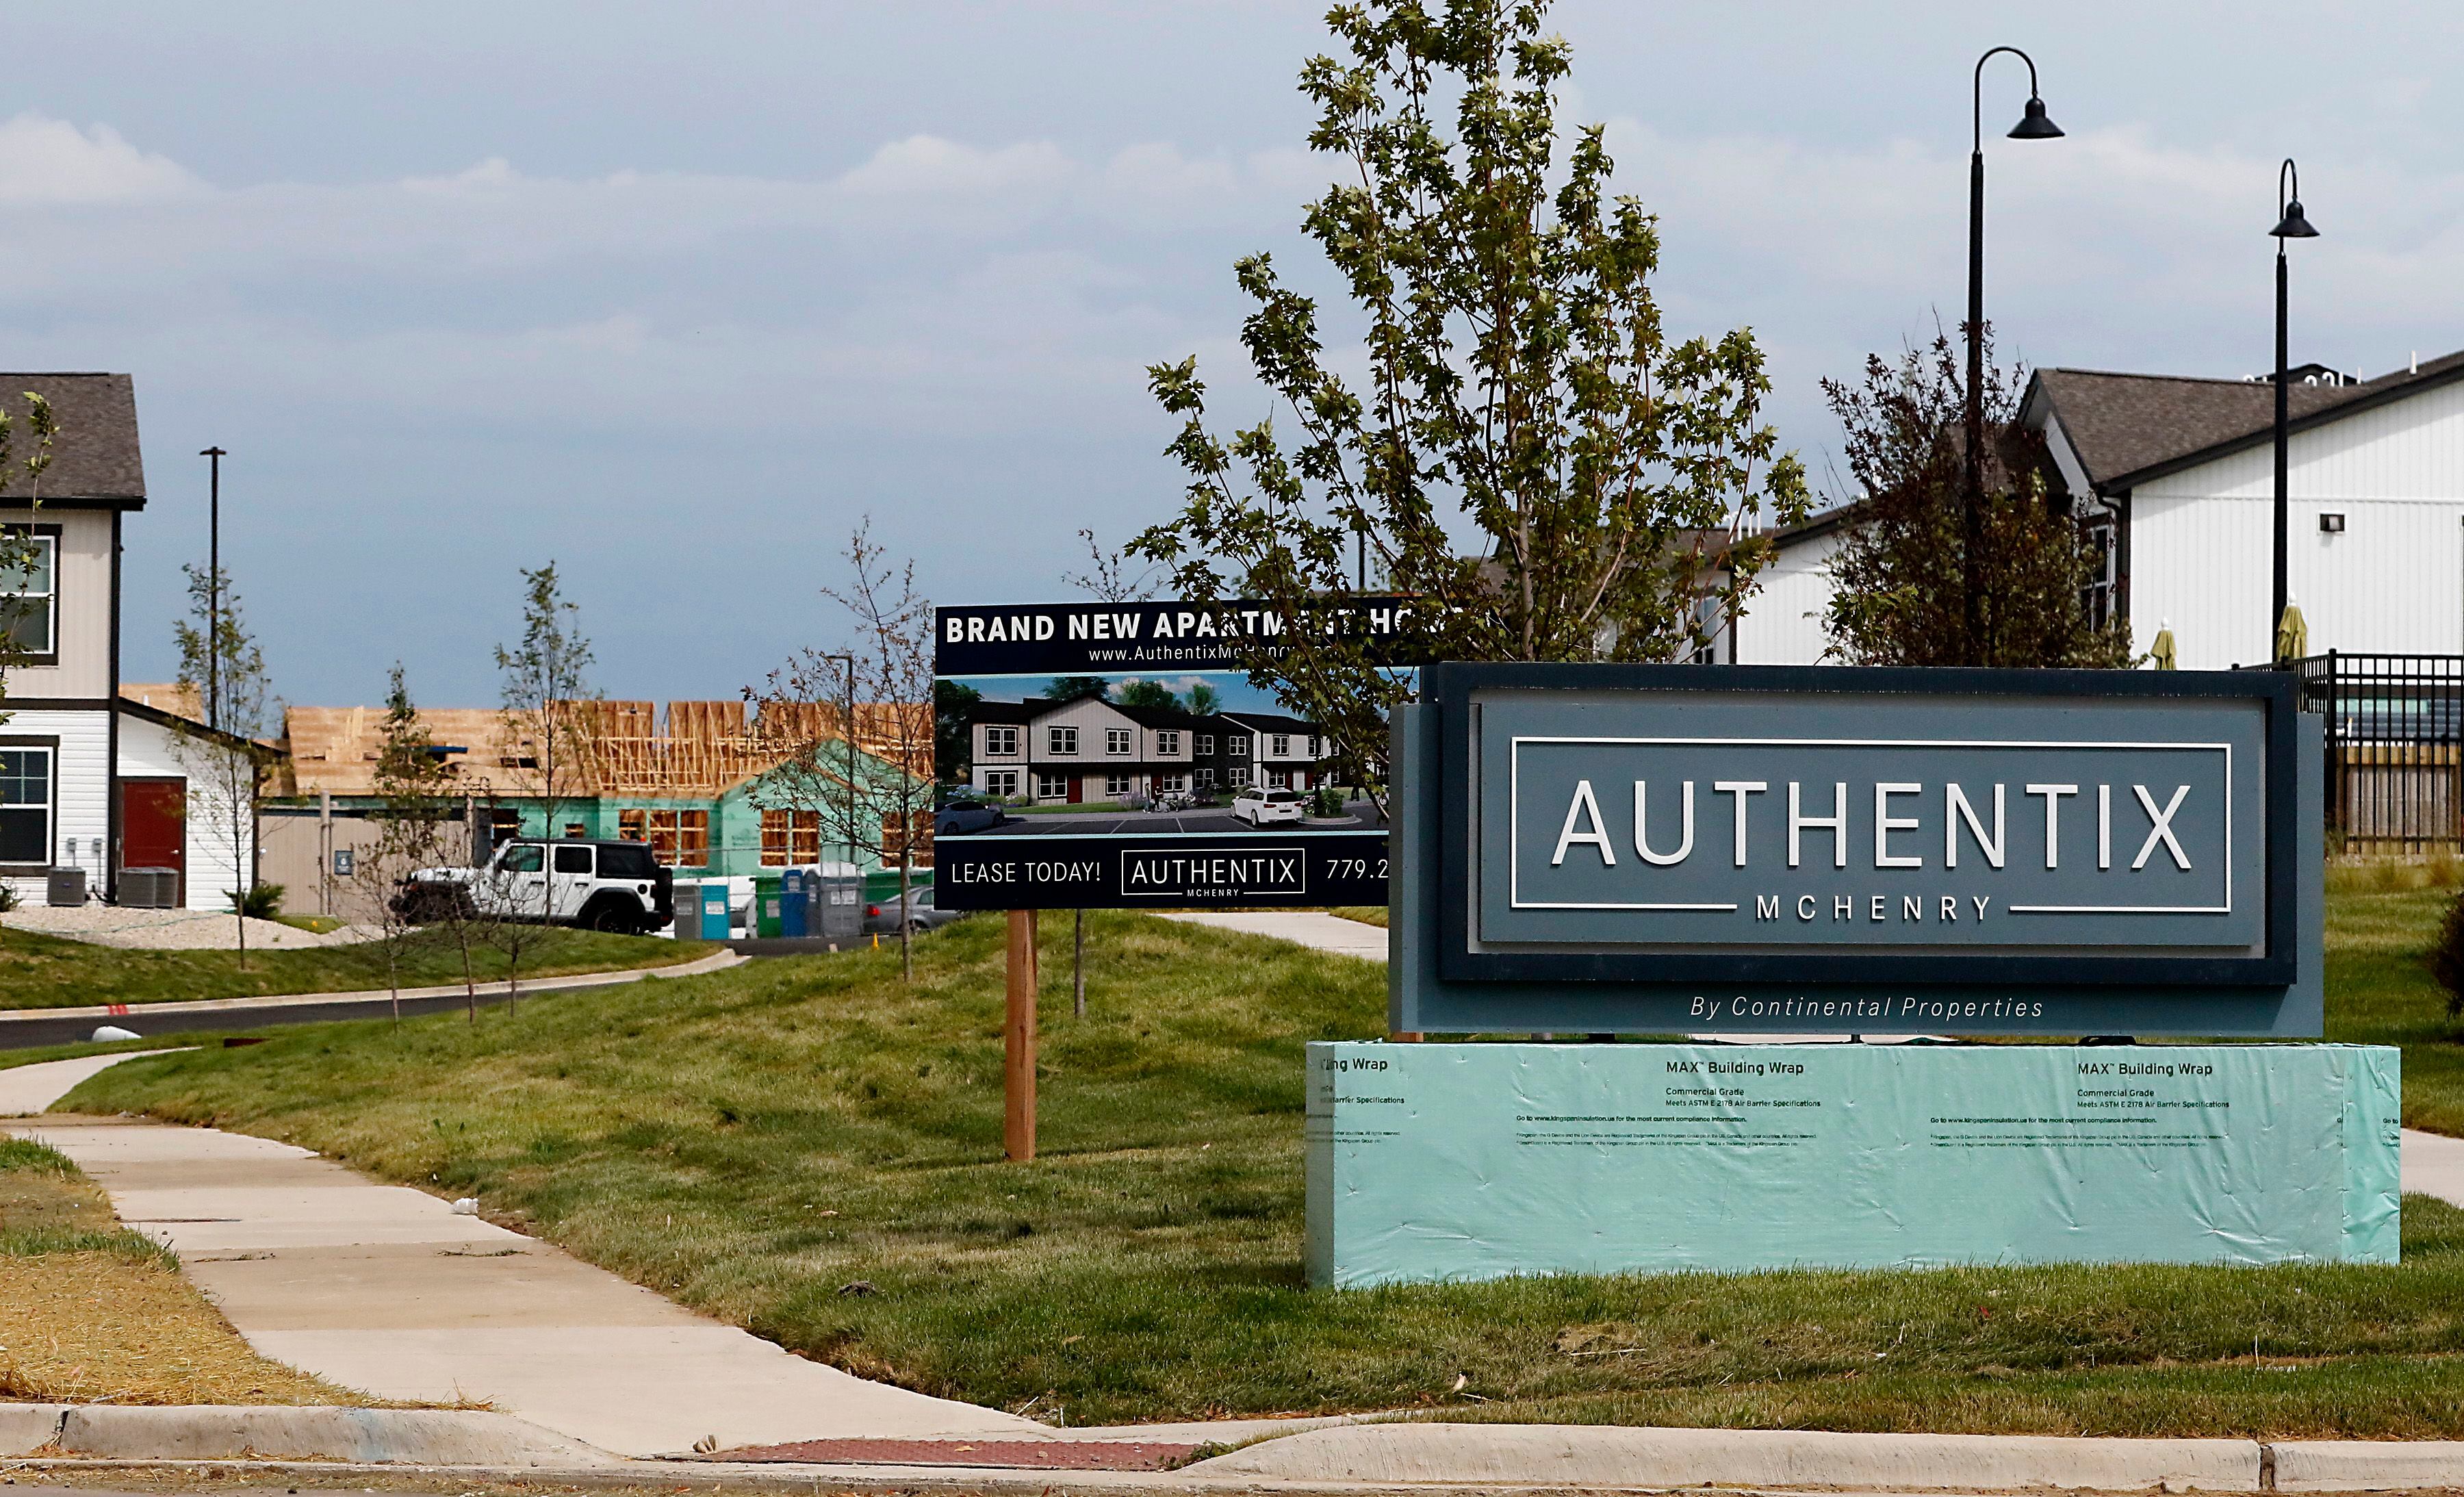 Work continues on Continental Properties' 288 unit Authentix McHenry apartment community at 3415 Blake Road, in McHenry, on Wednesday, August 3, 2022. their newest apartment community.